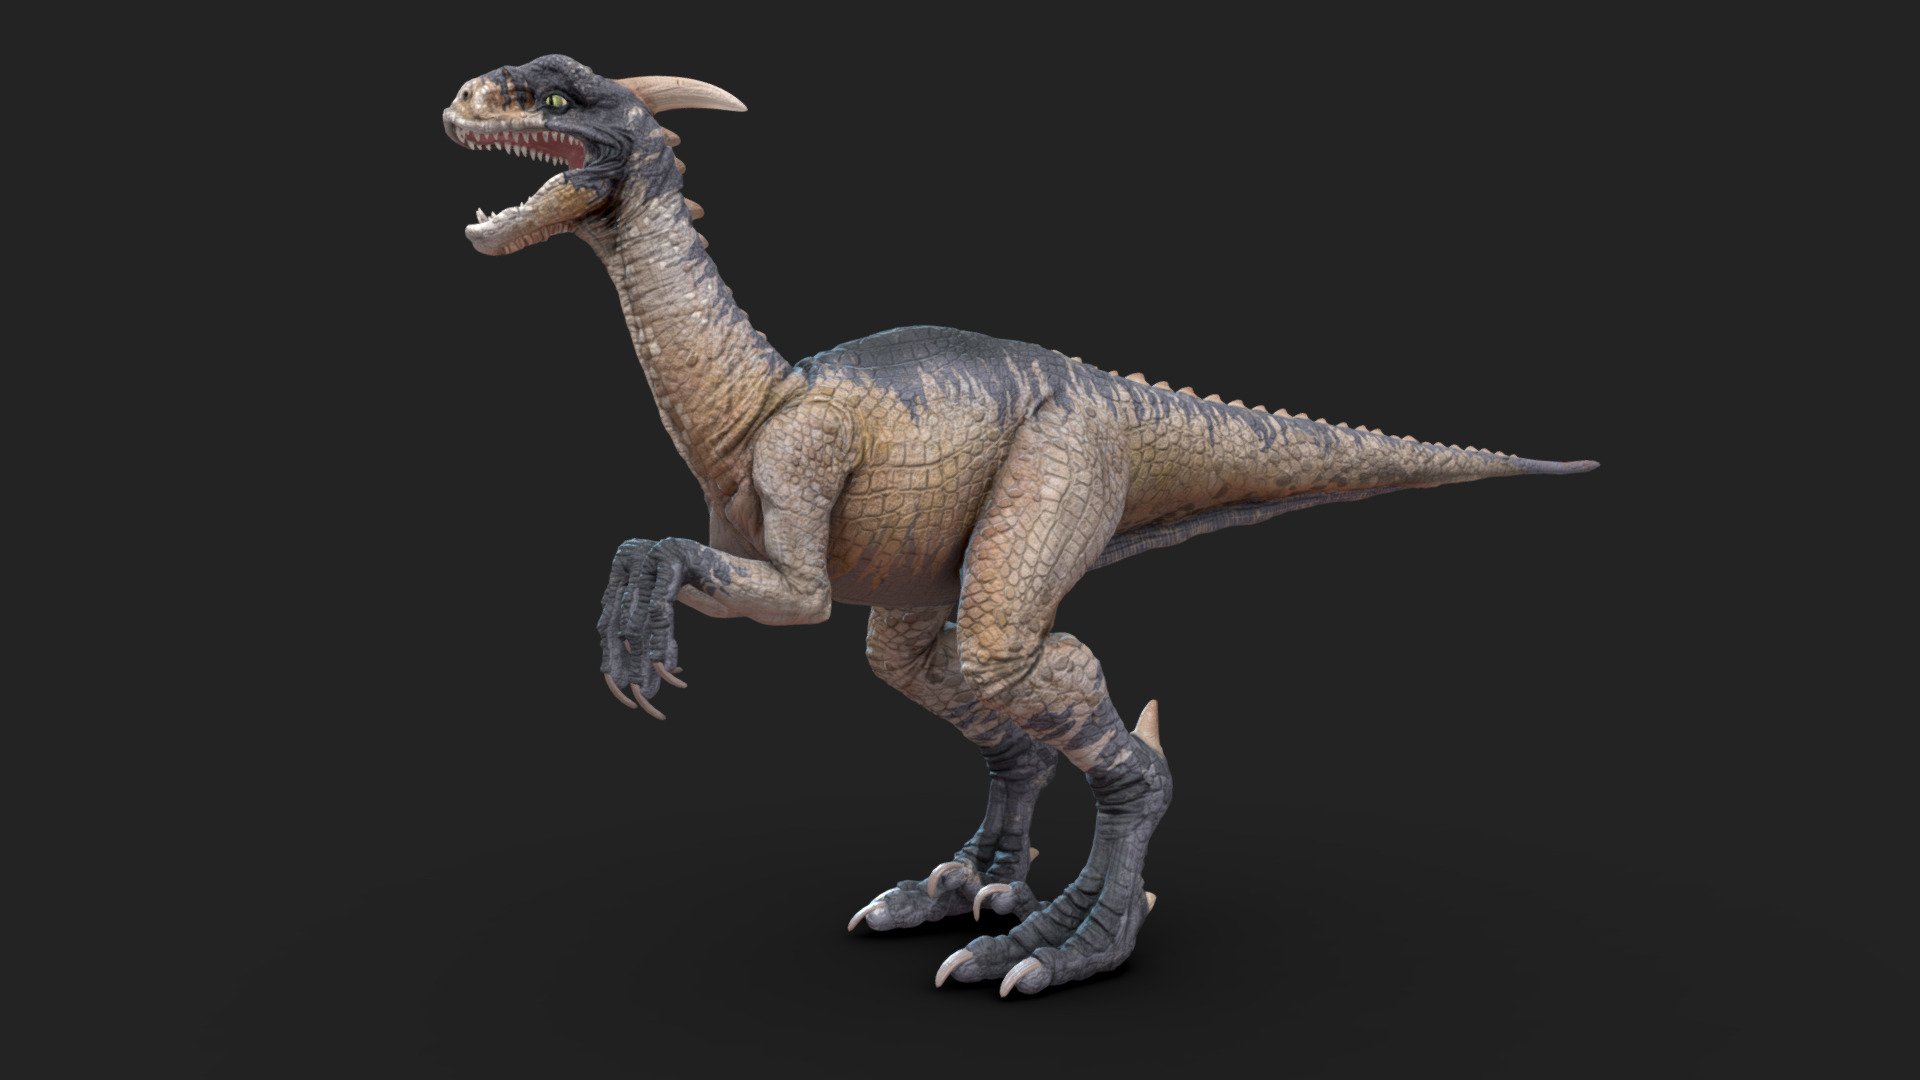 Dinosaur Tpose
Download it here: https://sketchfab.com/3d-models/dinosaur-with-saddle-ace0beb568614e7f881b3cba7438eb74
Created using Blender 2.8, Substance Painter and Photoshop.
Mount creature for my entry for #cubebrush #artwar4 - Dinosaur Tpose - Buy Royalty Free 3D model by jakobscheidt 3d model